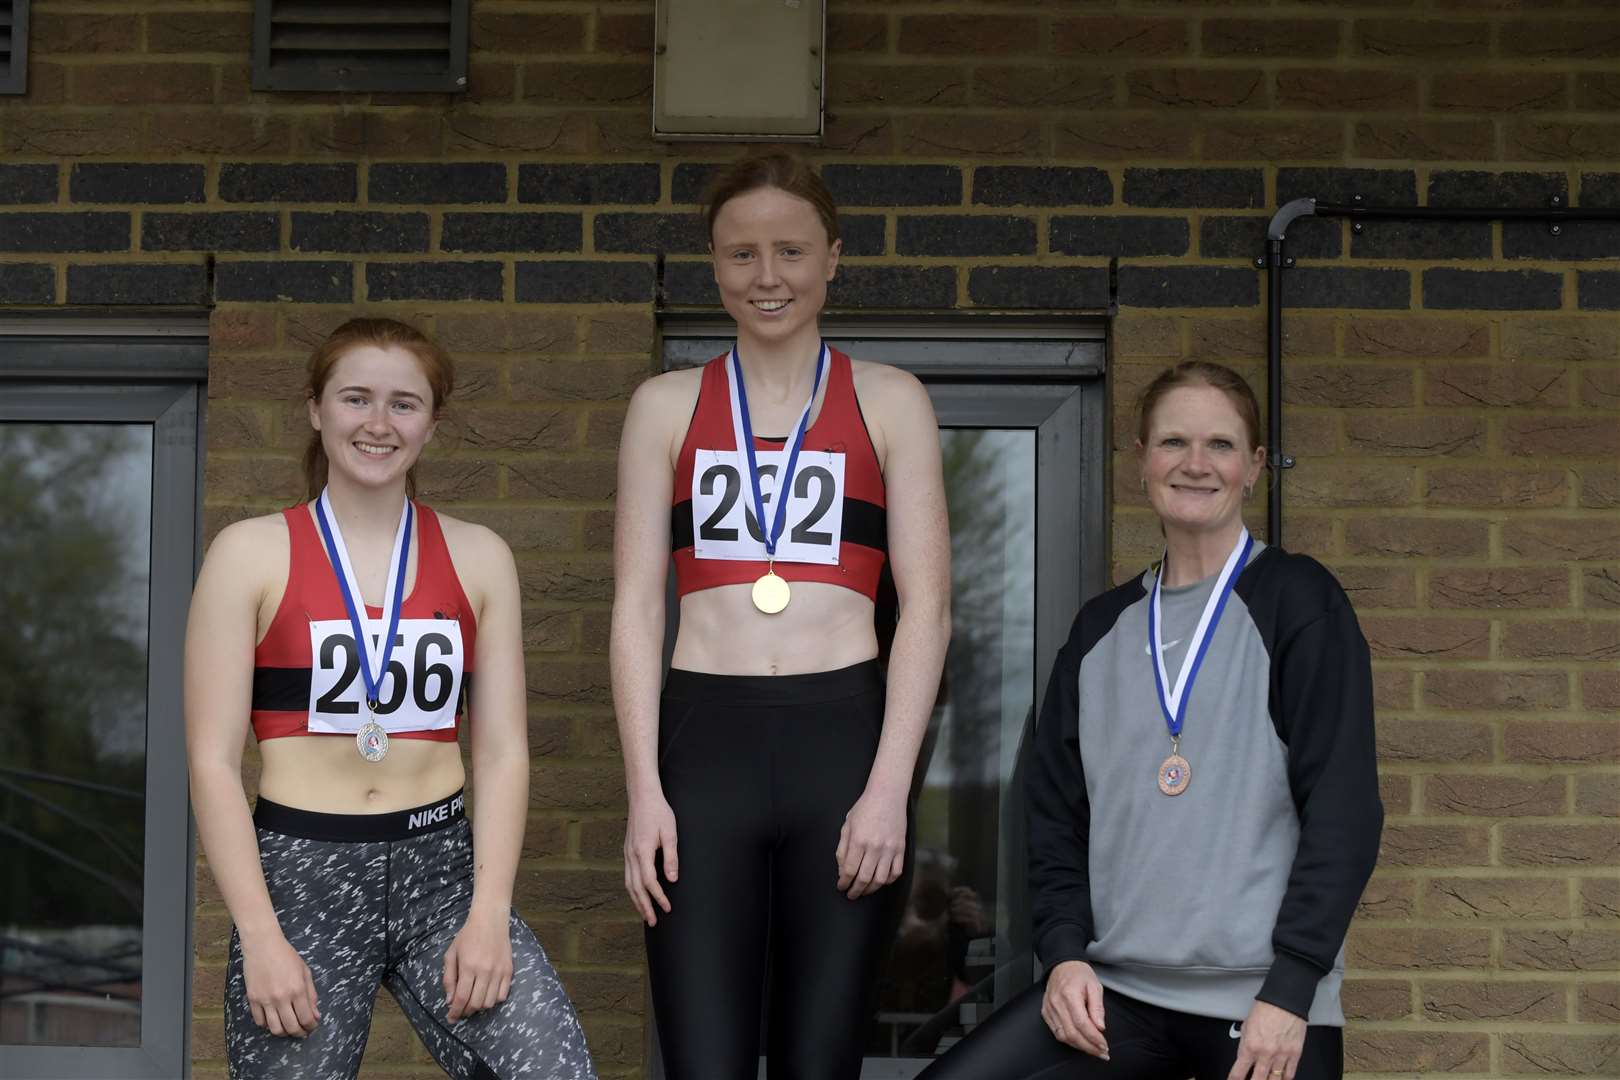 200m senior women podium winners, second place Zara Edeleanu (Medway and Maidstone AC), winner Lucy Hope (Medway and Maidstone AC) and third placed Louisa Vallins (Blackheath & Bromley Harriers) Picture: Barry Goodwin